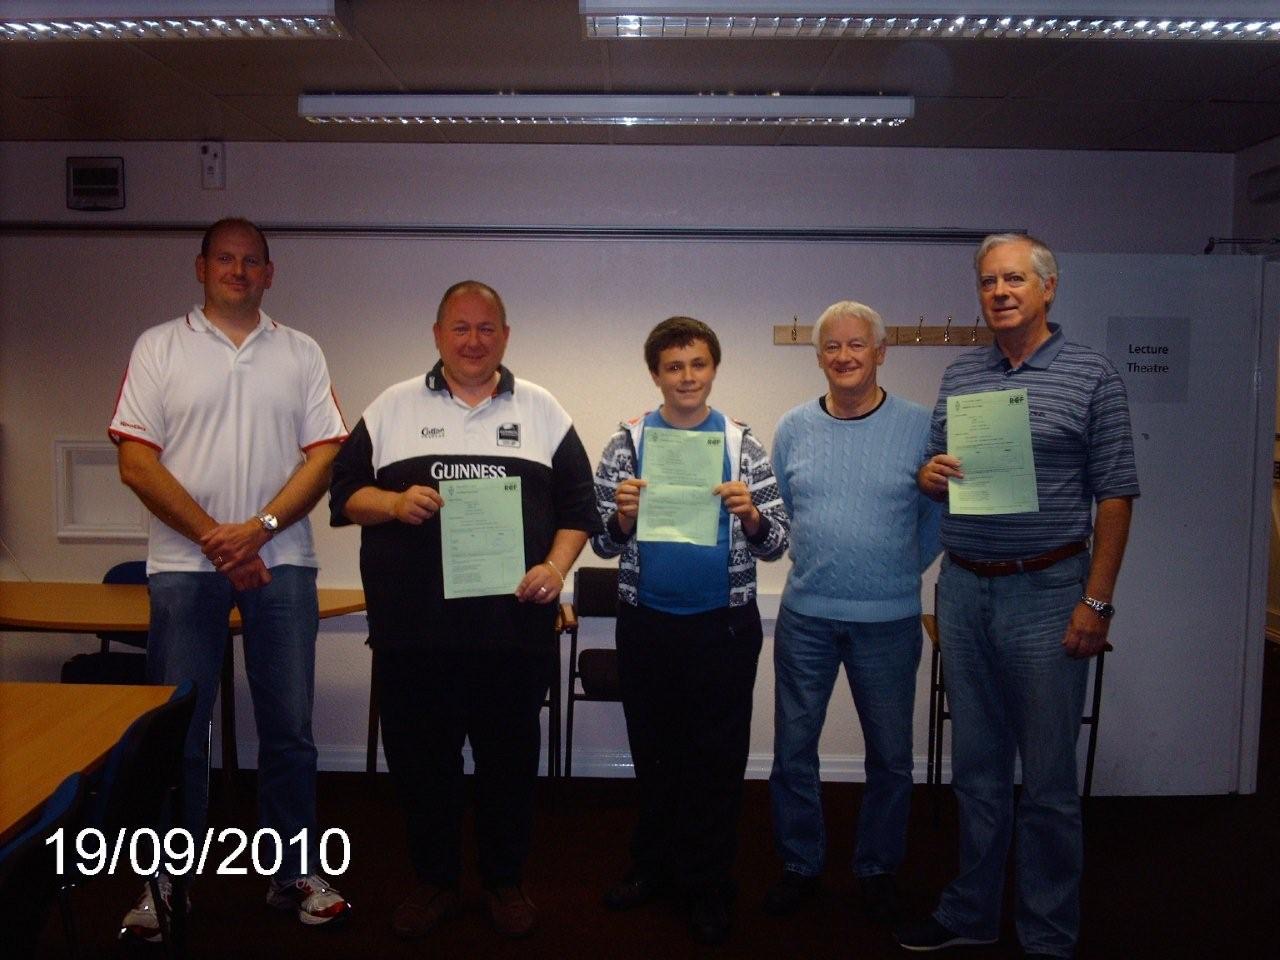 Andy Morgan (MD0MDI), Dave Cain (2D0YLX), Unknown, John Butler (GD0NFN) and another Unknown.